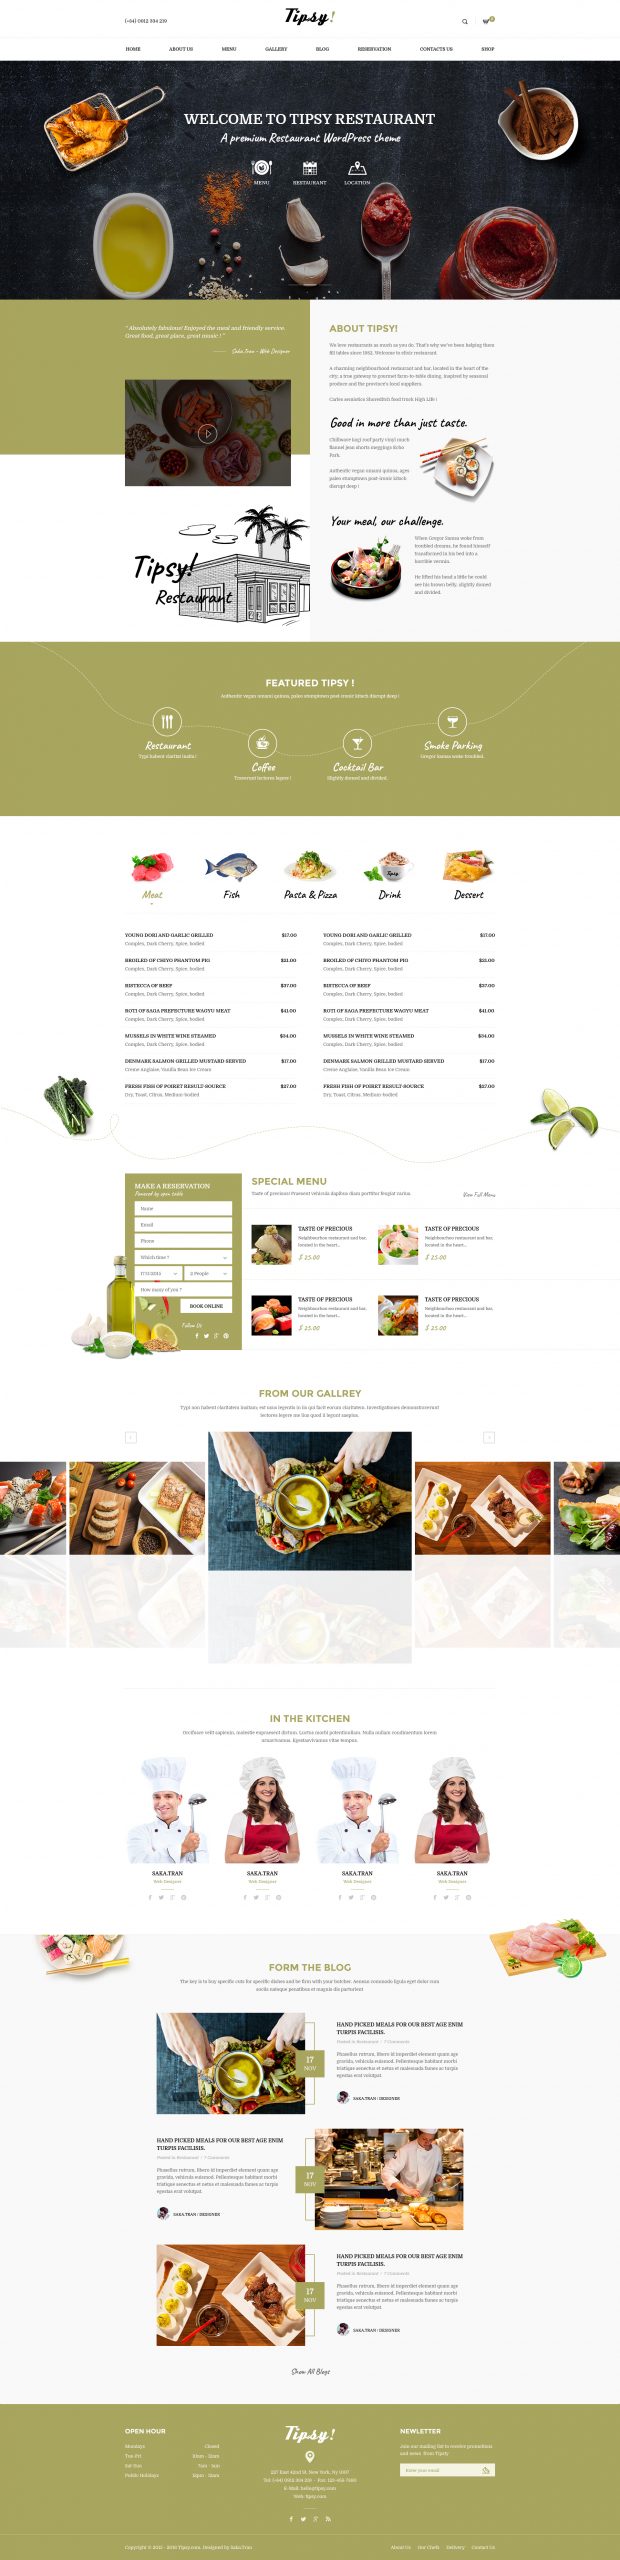 03_home page